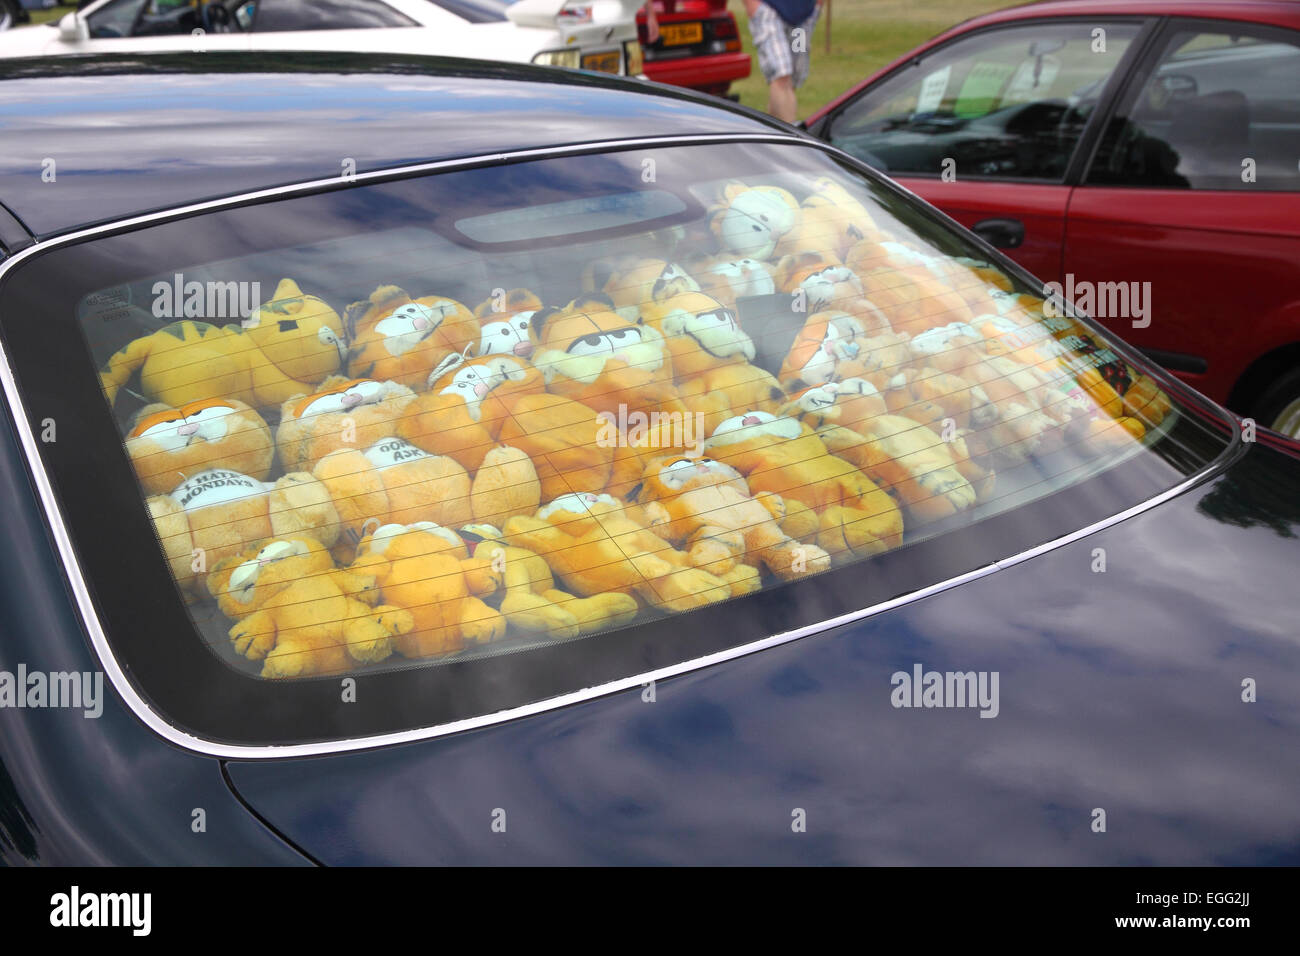 Many Garfield cuddly toys in rear window of car Stock Photo